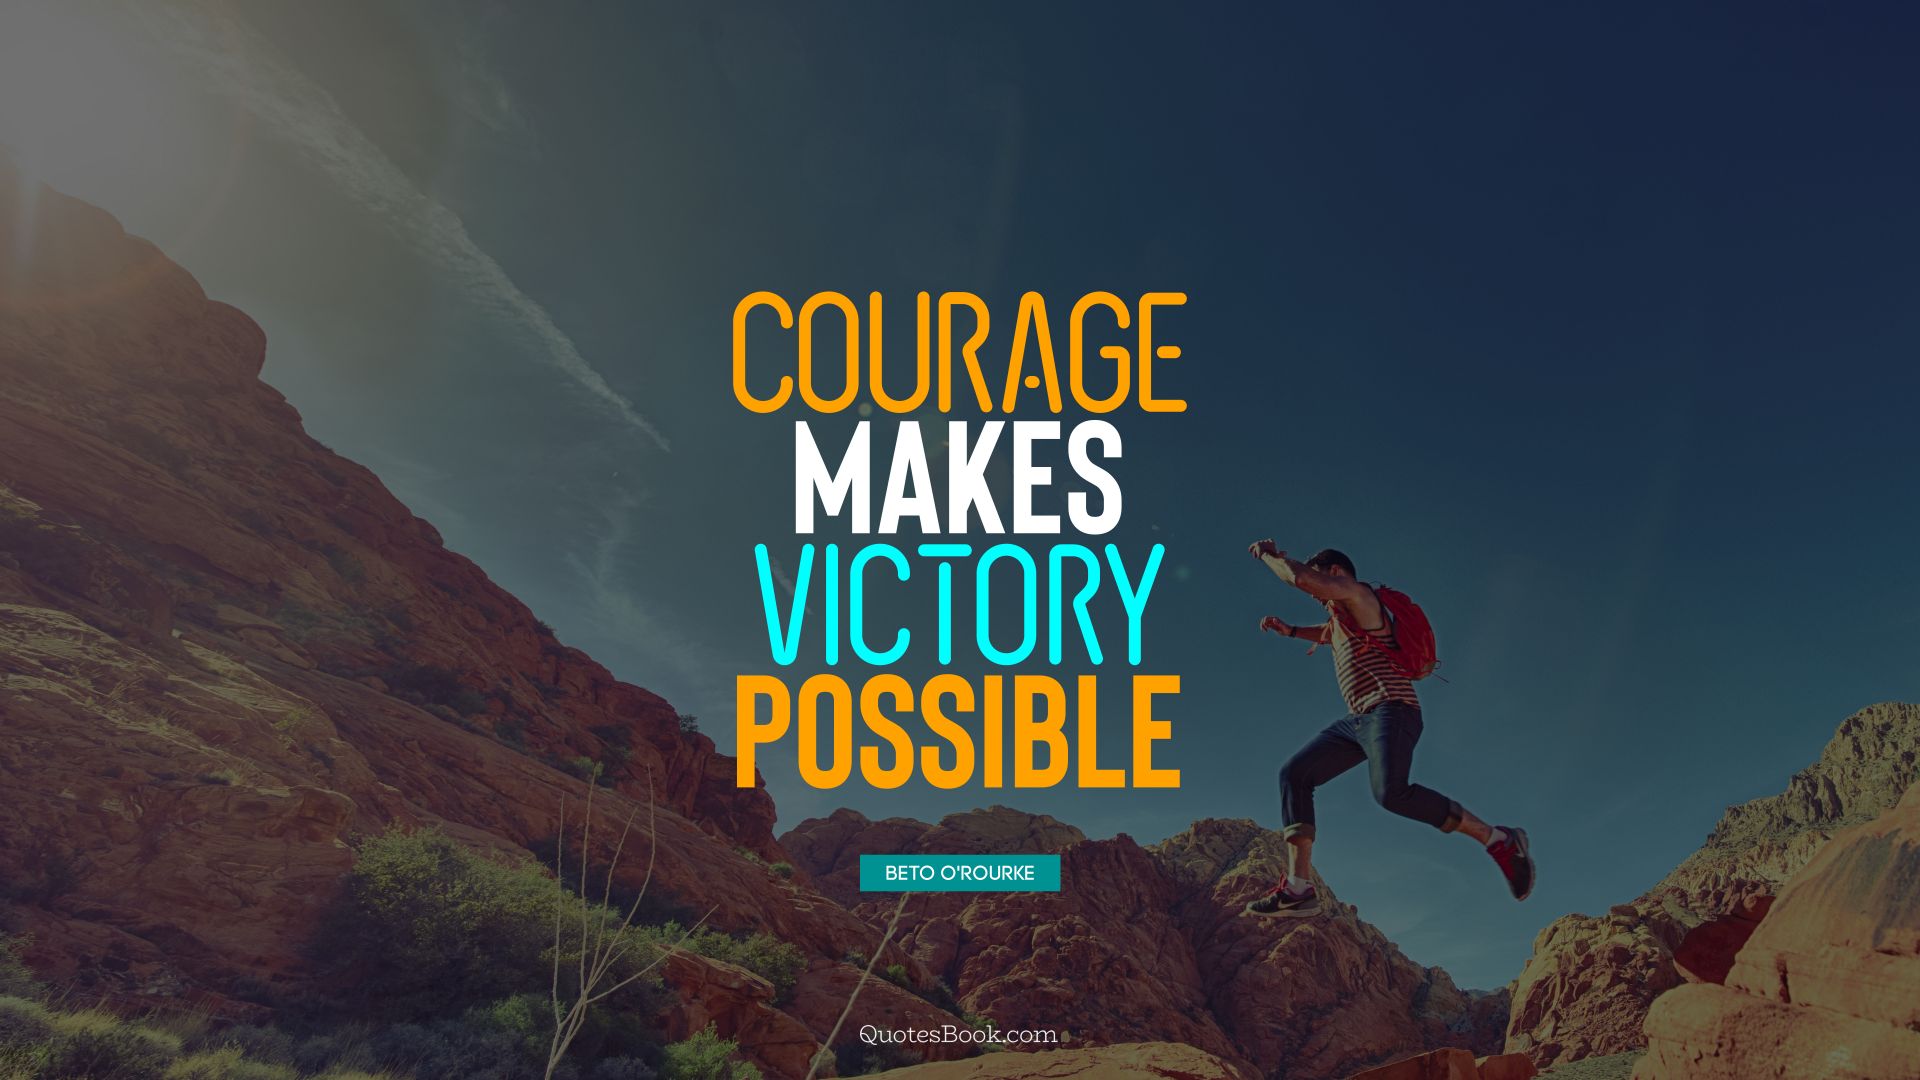 Courage makes victory possible. - Quote by Beto O'Rourke